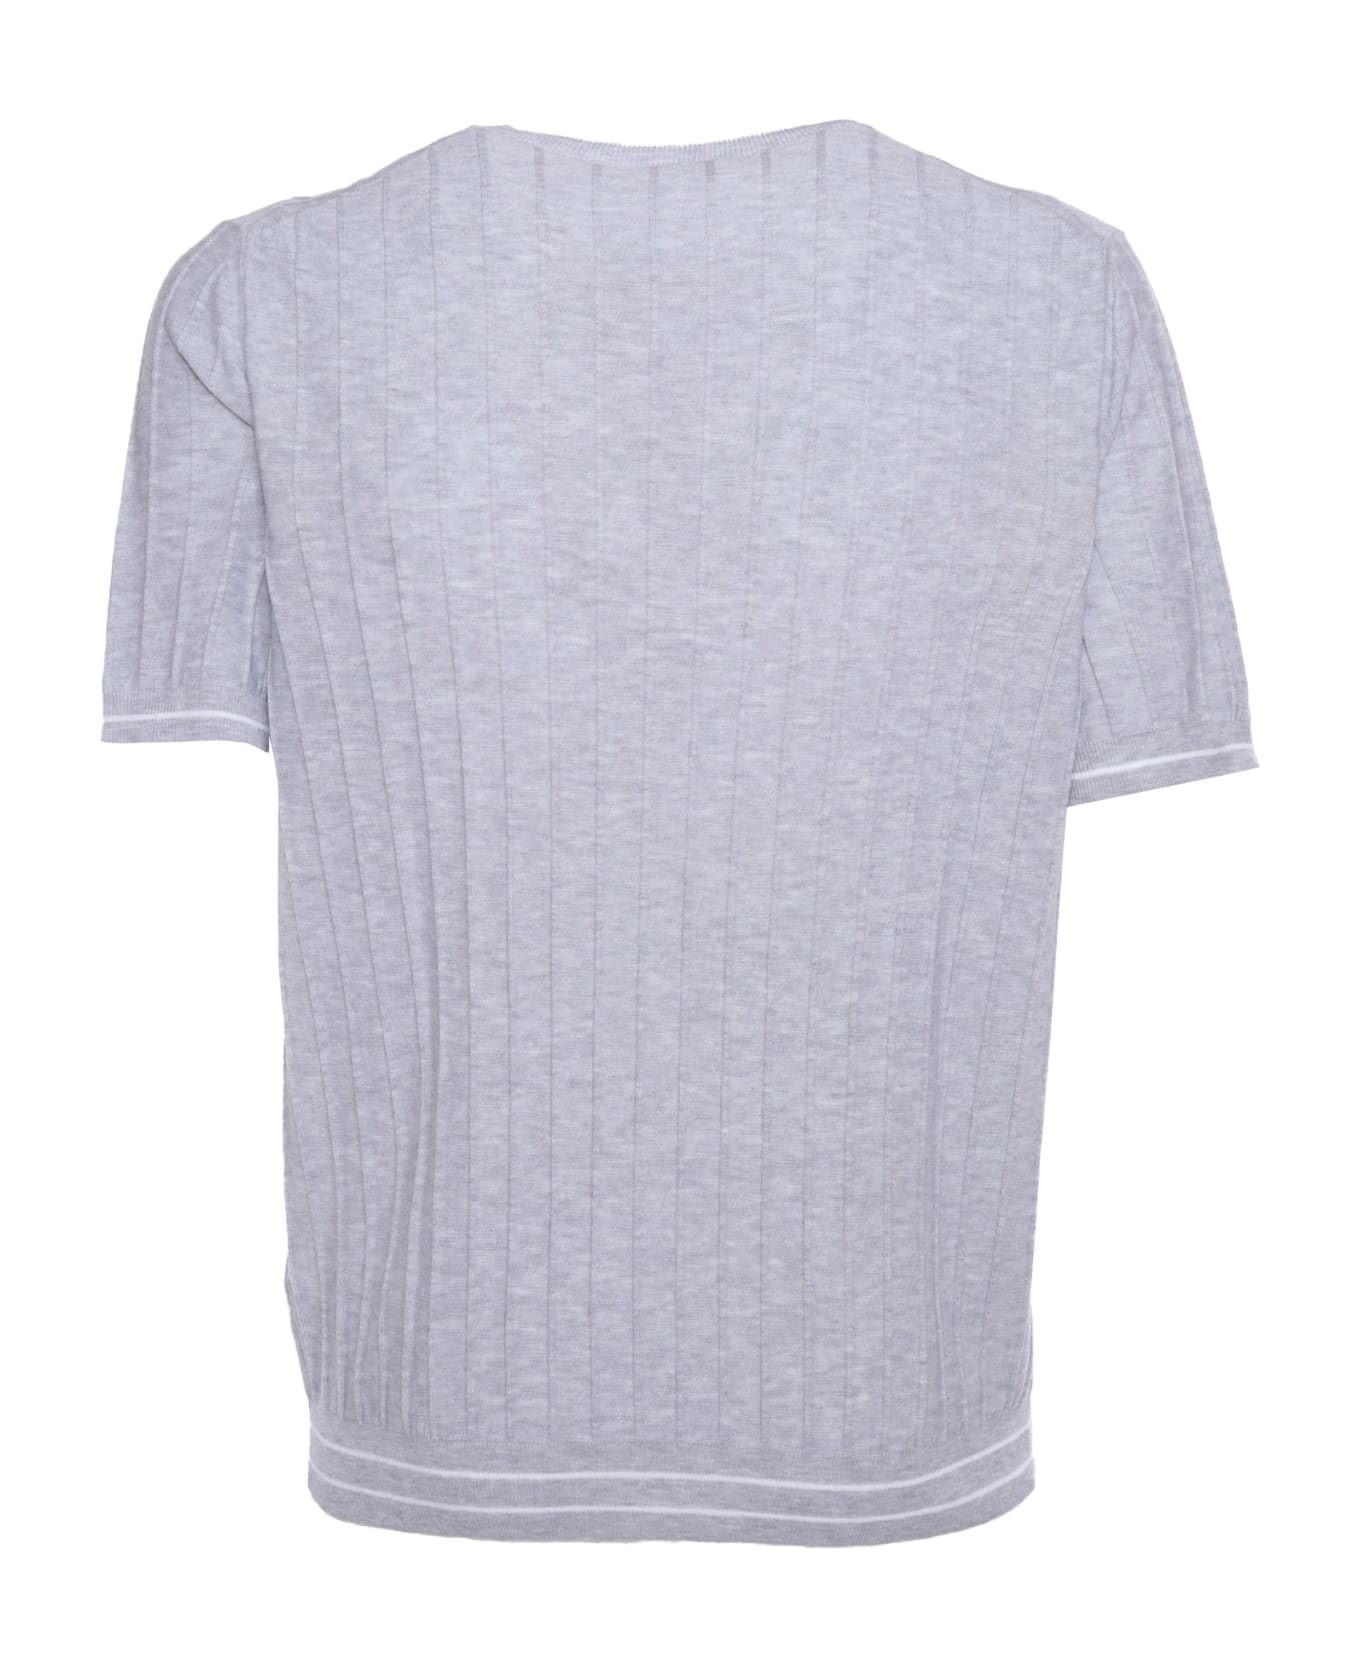 Peserico Knitted T-shirt - GREY